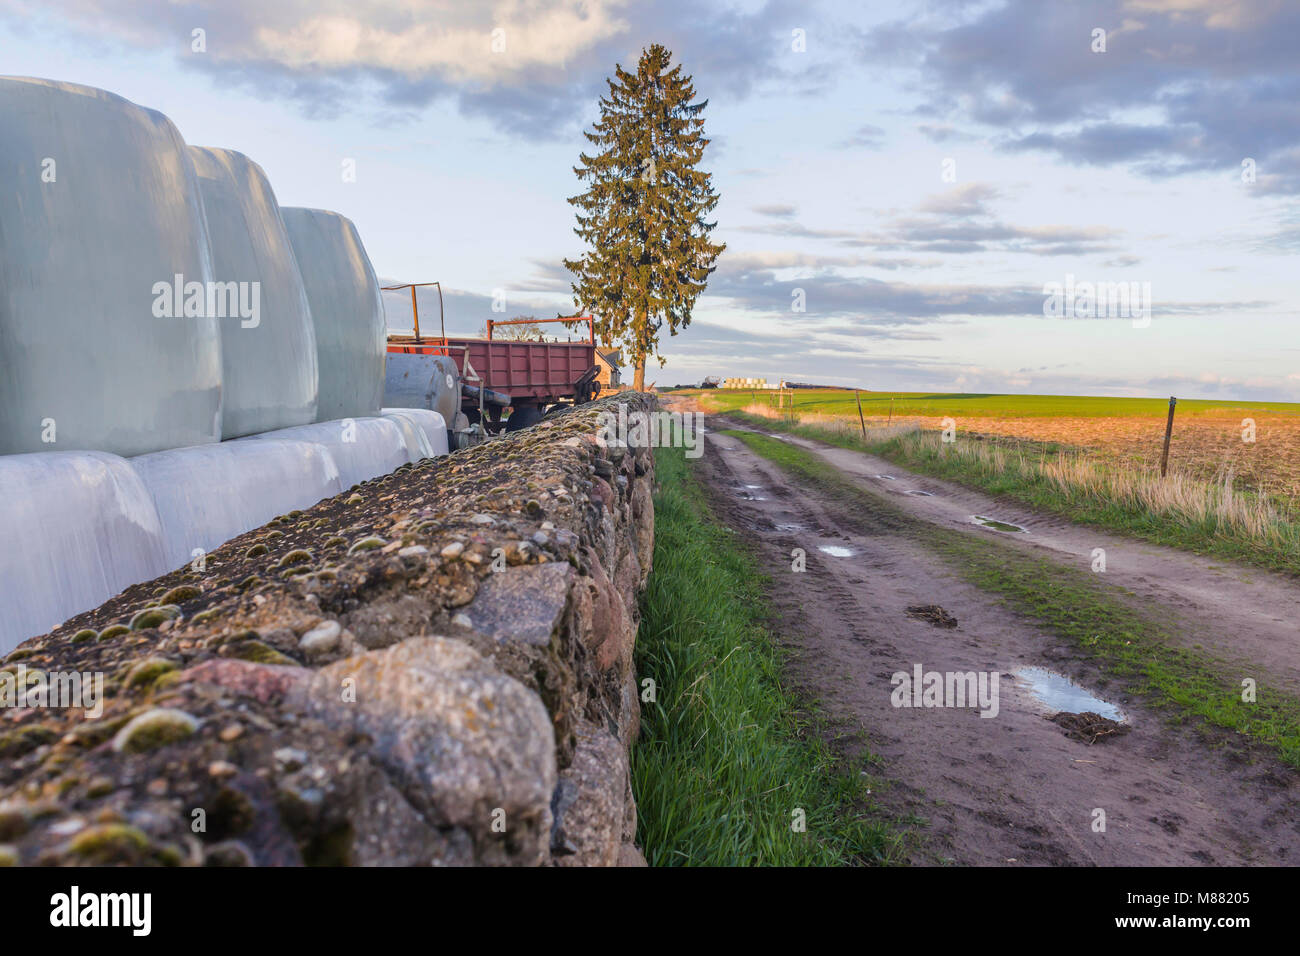 Stacked like a pyramid,bales of hay and silage wrapped in membrane.Food for cows is stored near the stone wall.Field,road and spruce in perspective. Stock Photo